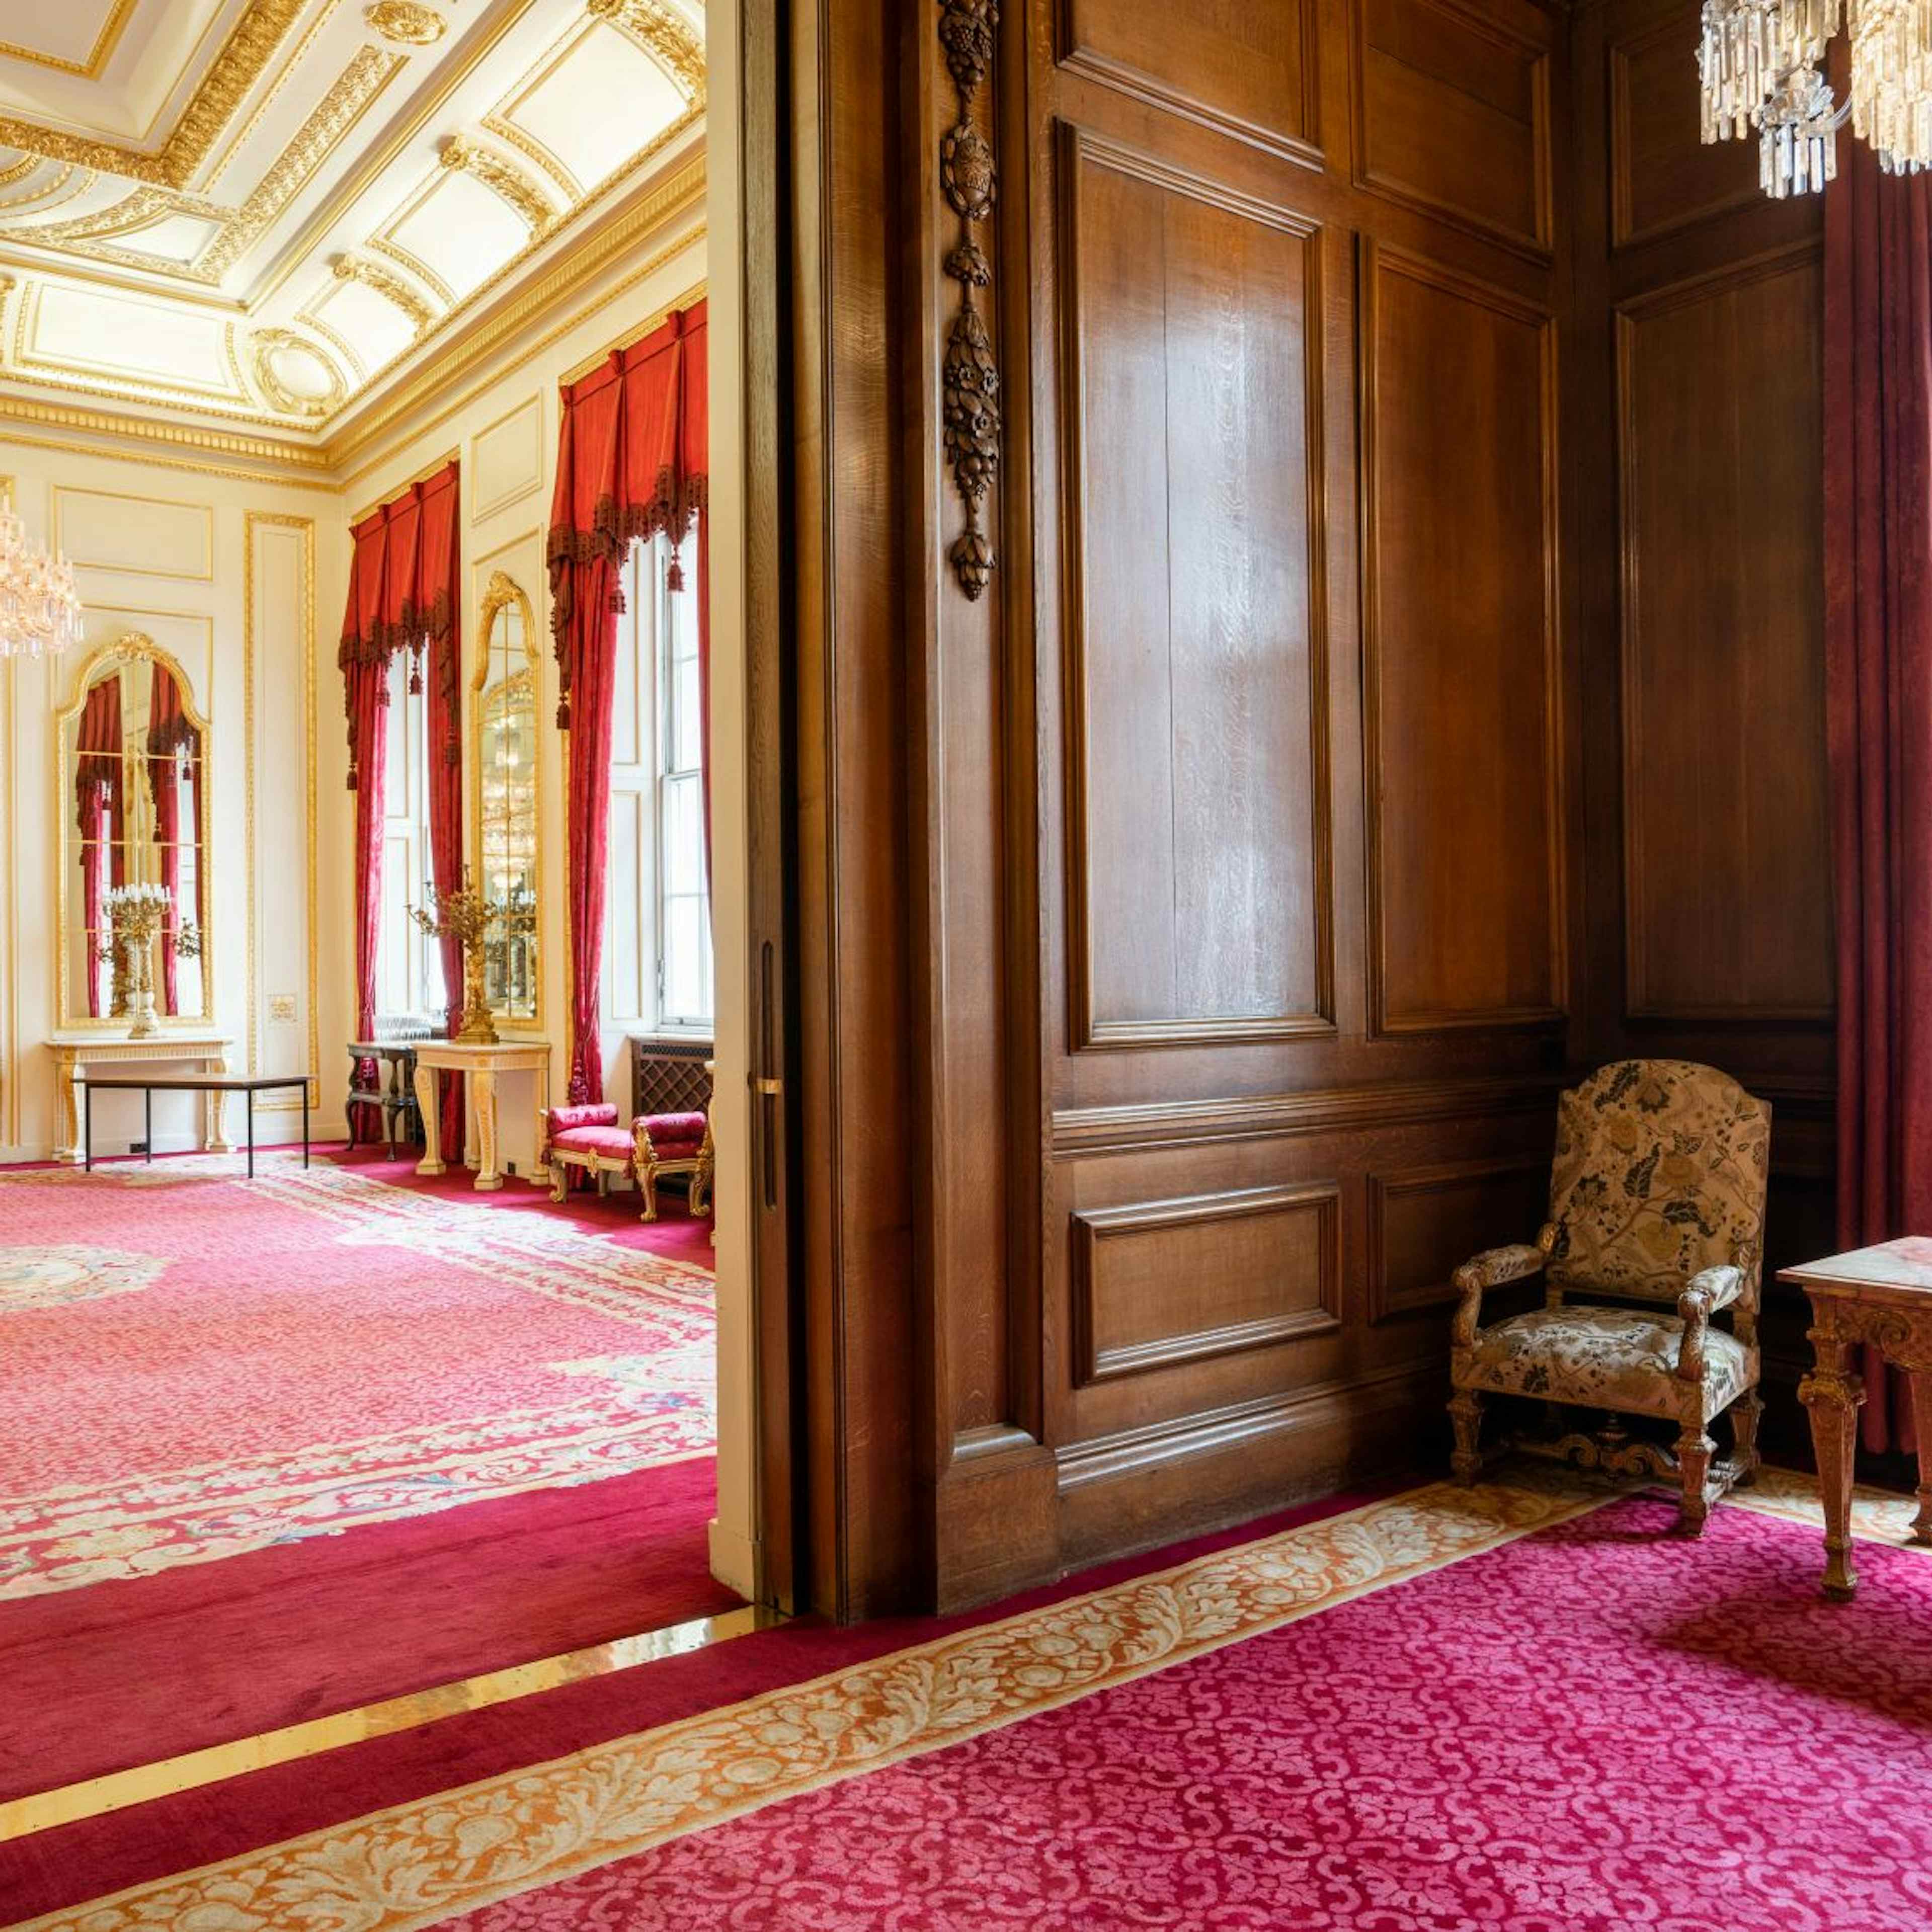 Goldsmiths' Hall - The Drawing Room image 2